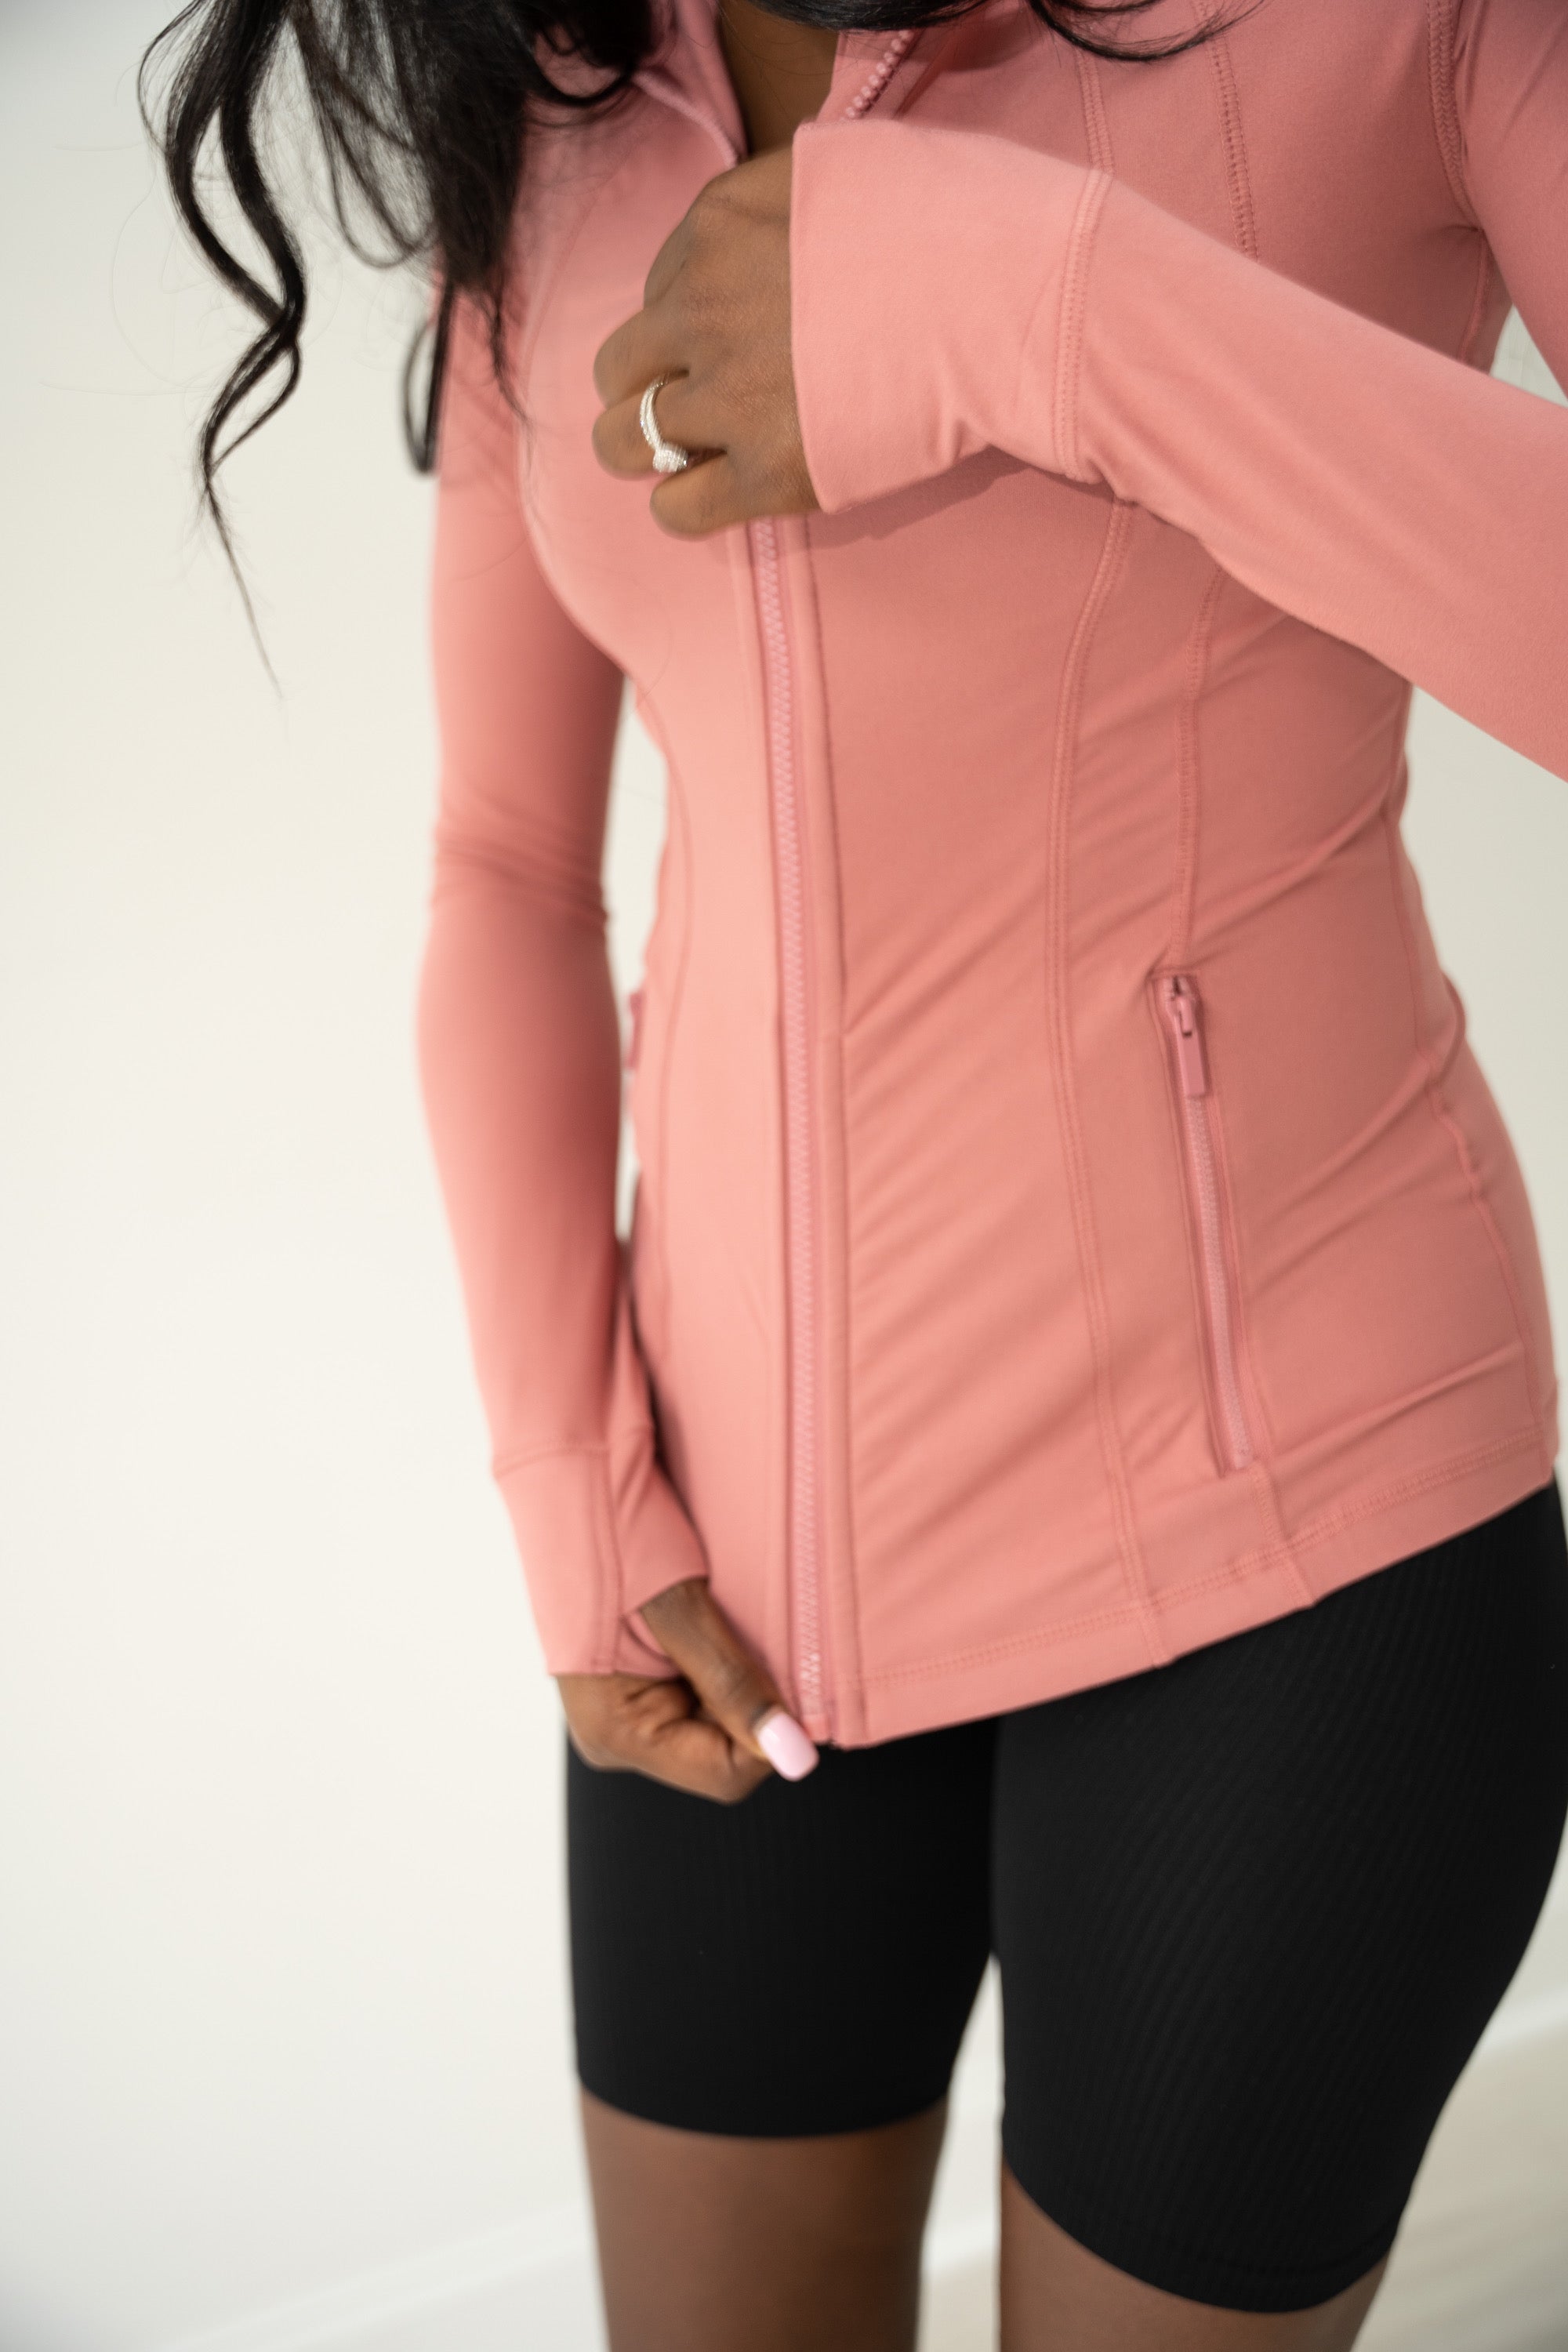 Rose Mock-Neck active jacket with thumbholes and full-length zipper.